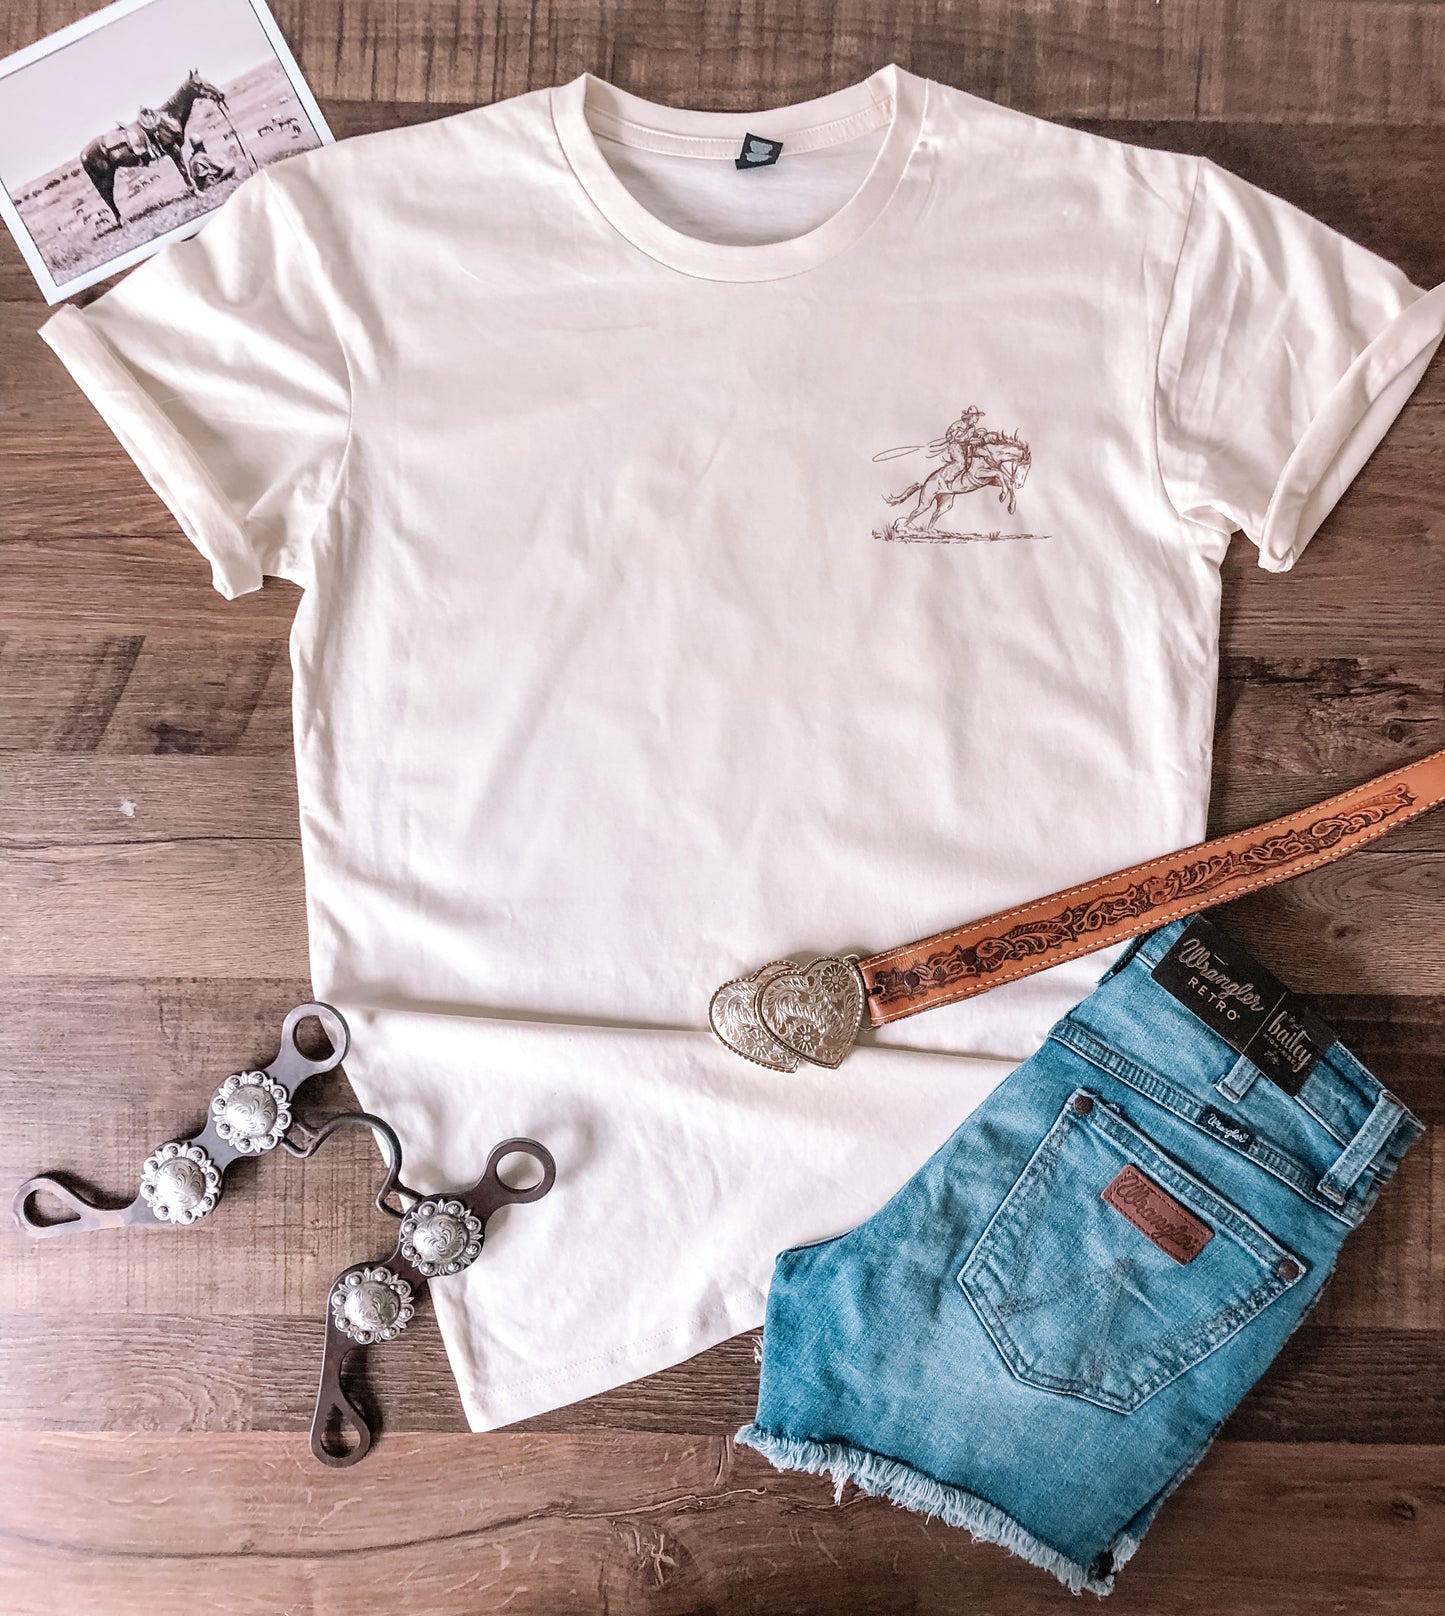 Wild & Free (Adult) Double Sided Tee - Natural